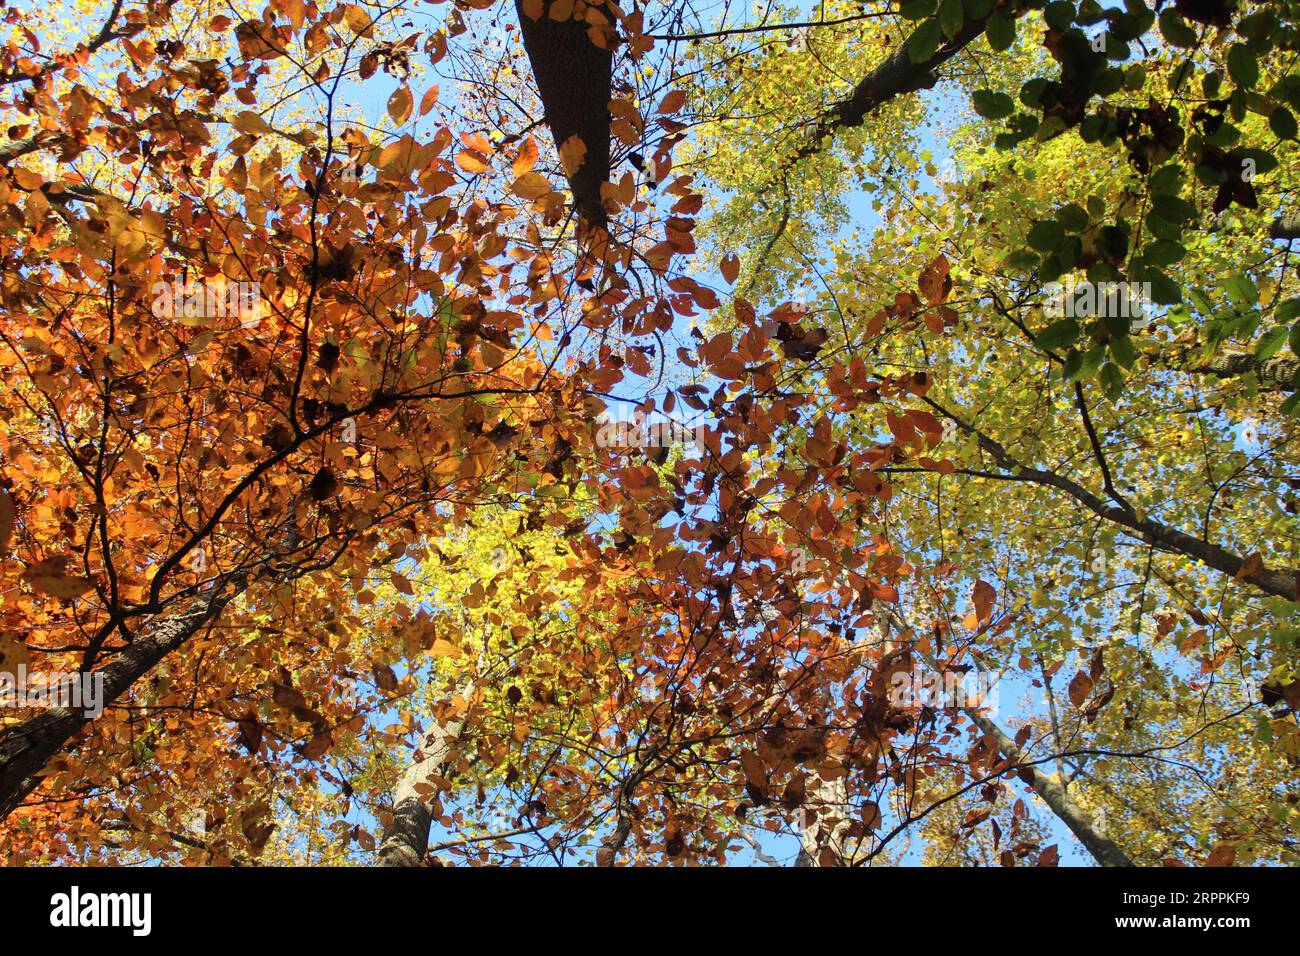 Skyward View of the Foliage of High-Rise trees with their changing leaves in Maryland, United States. Stock Photo